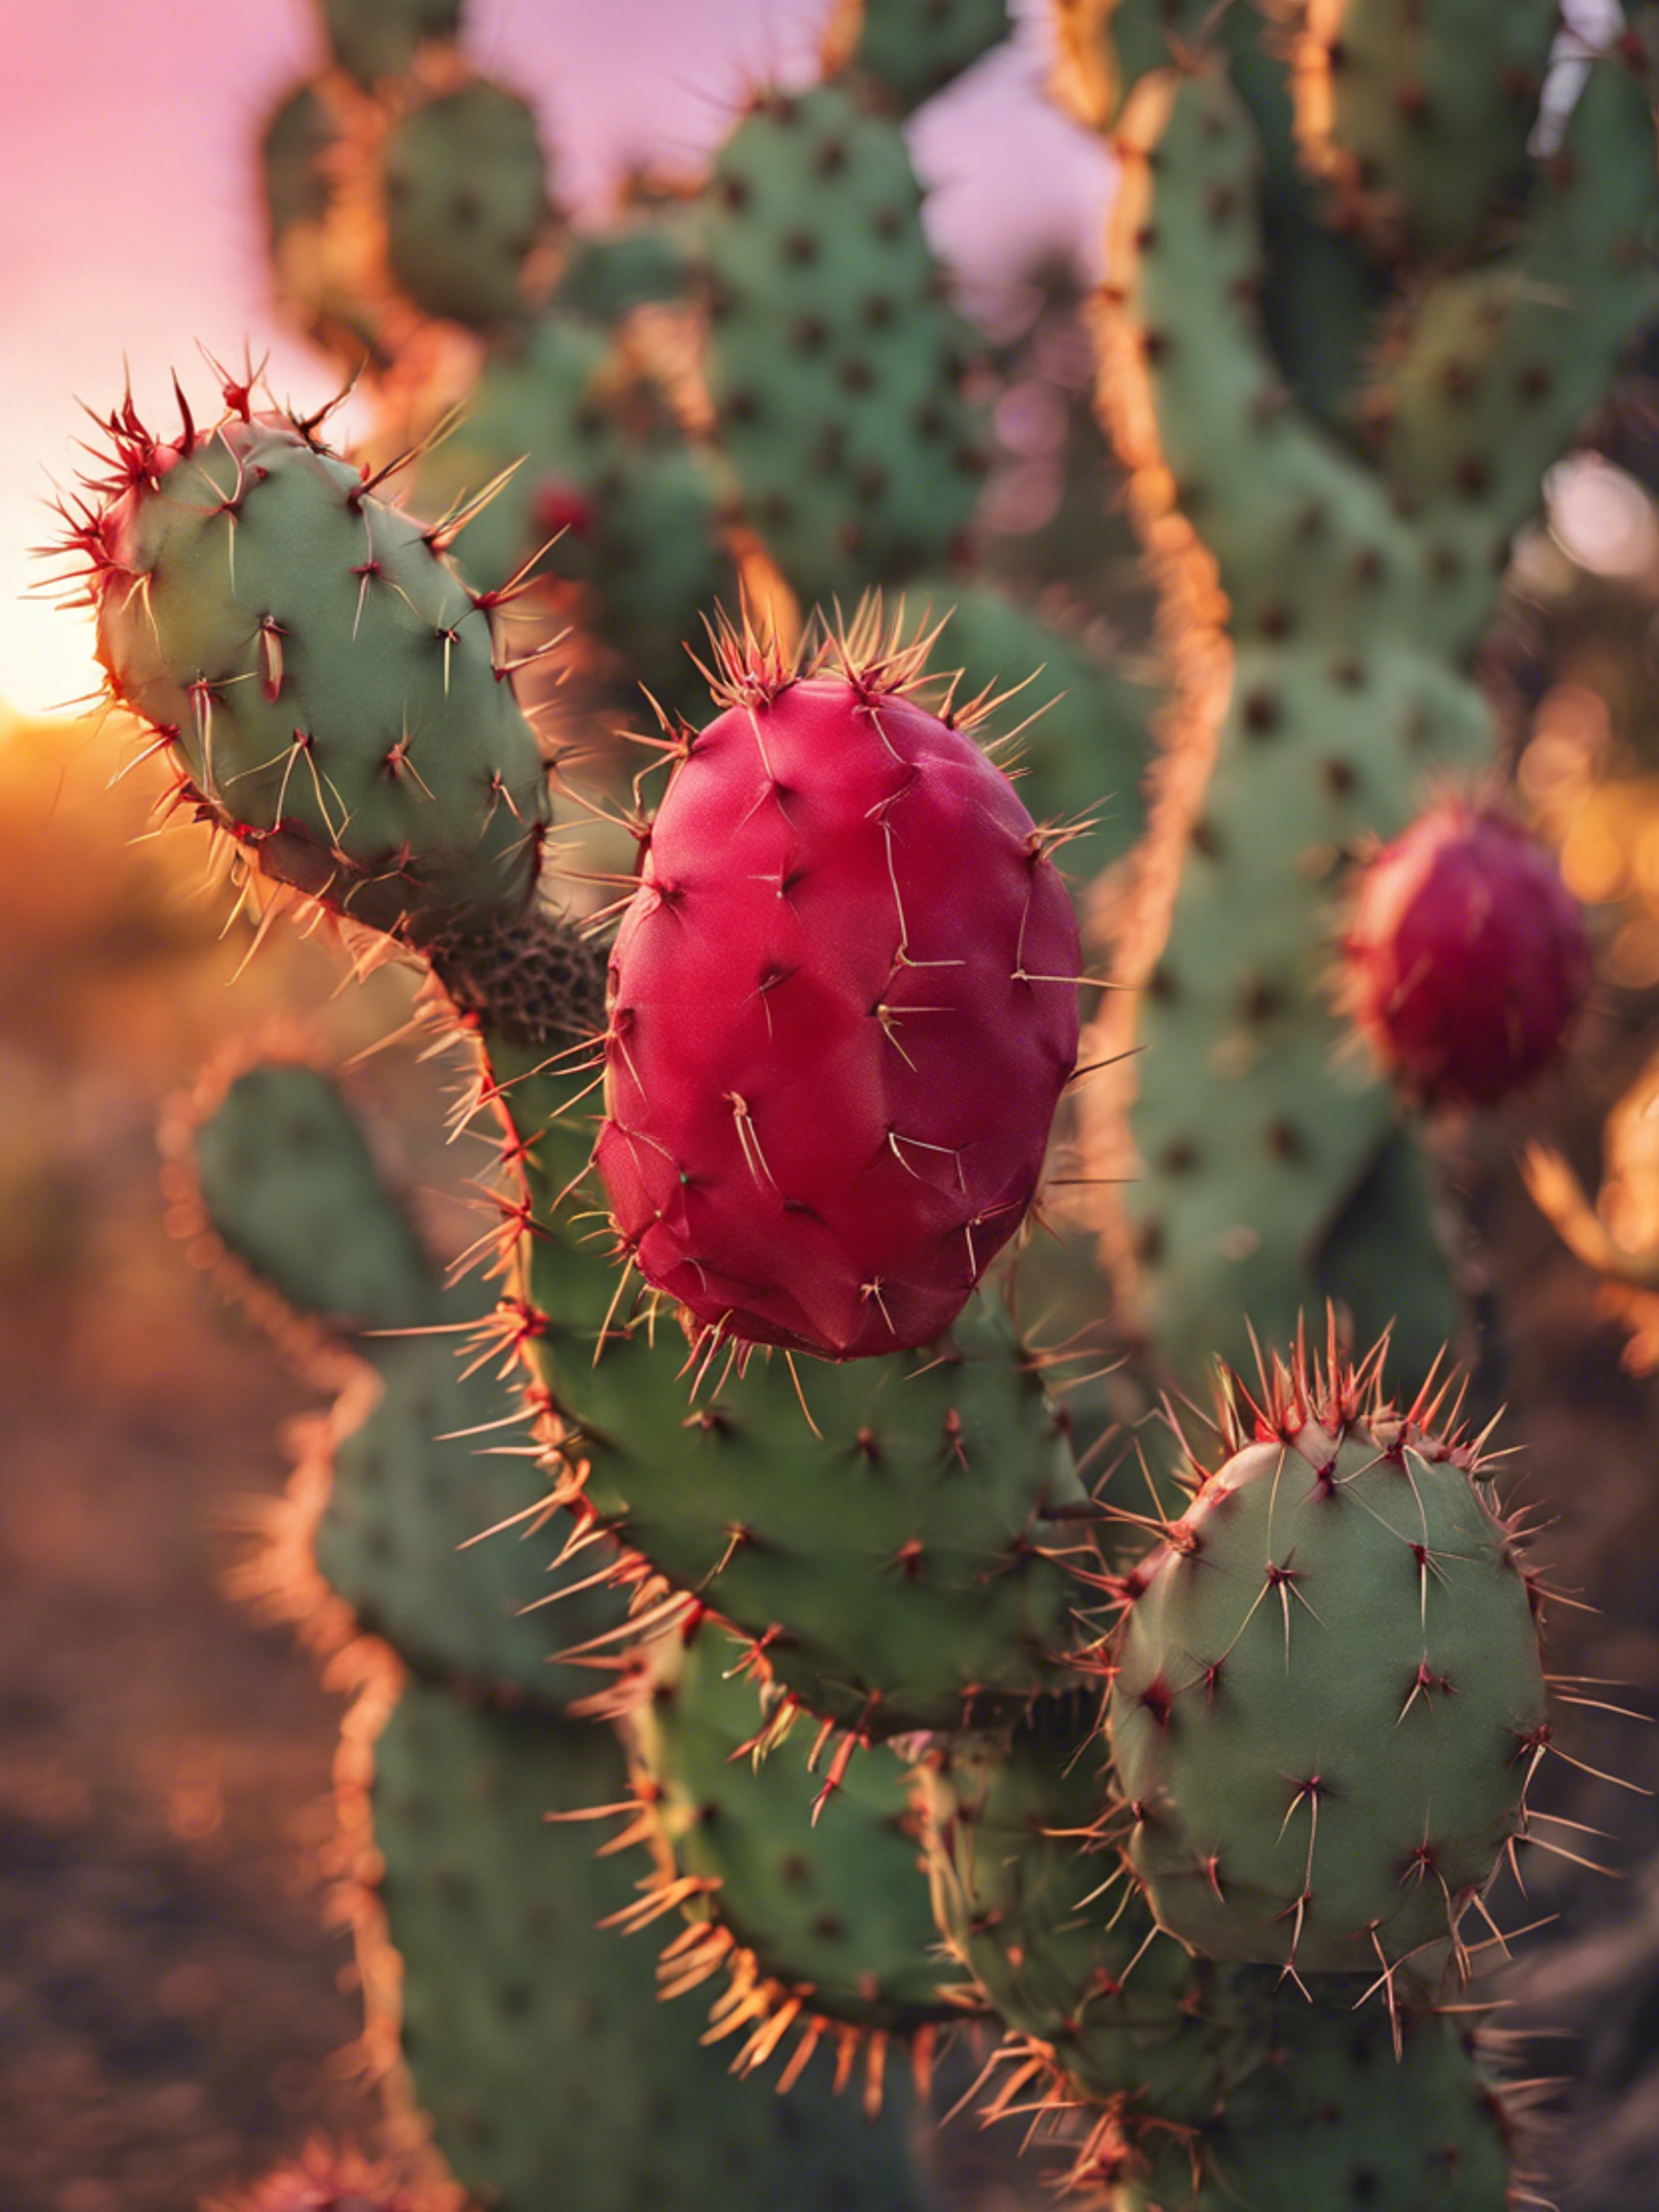 A prickly pear cactus with ripe, red fruits against a sunset background. Валлпапер[5965817ee192450fa25b]